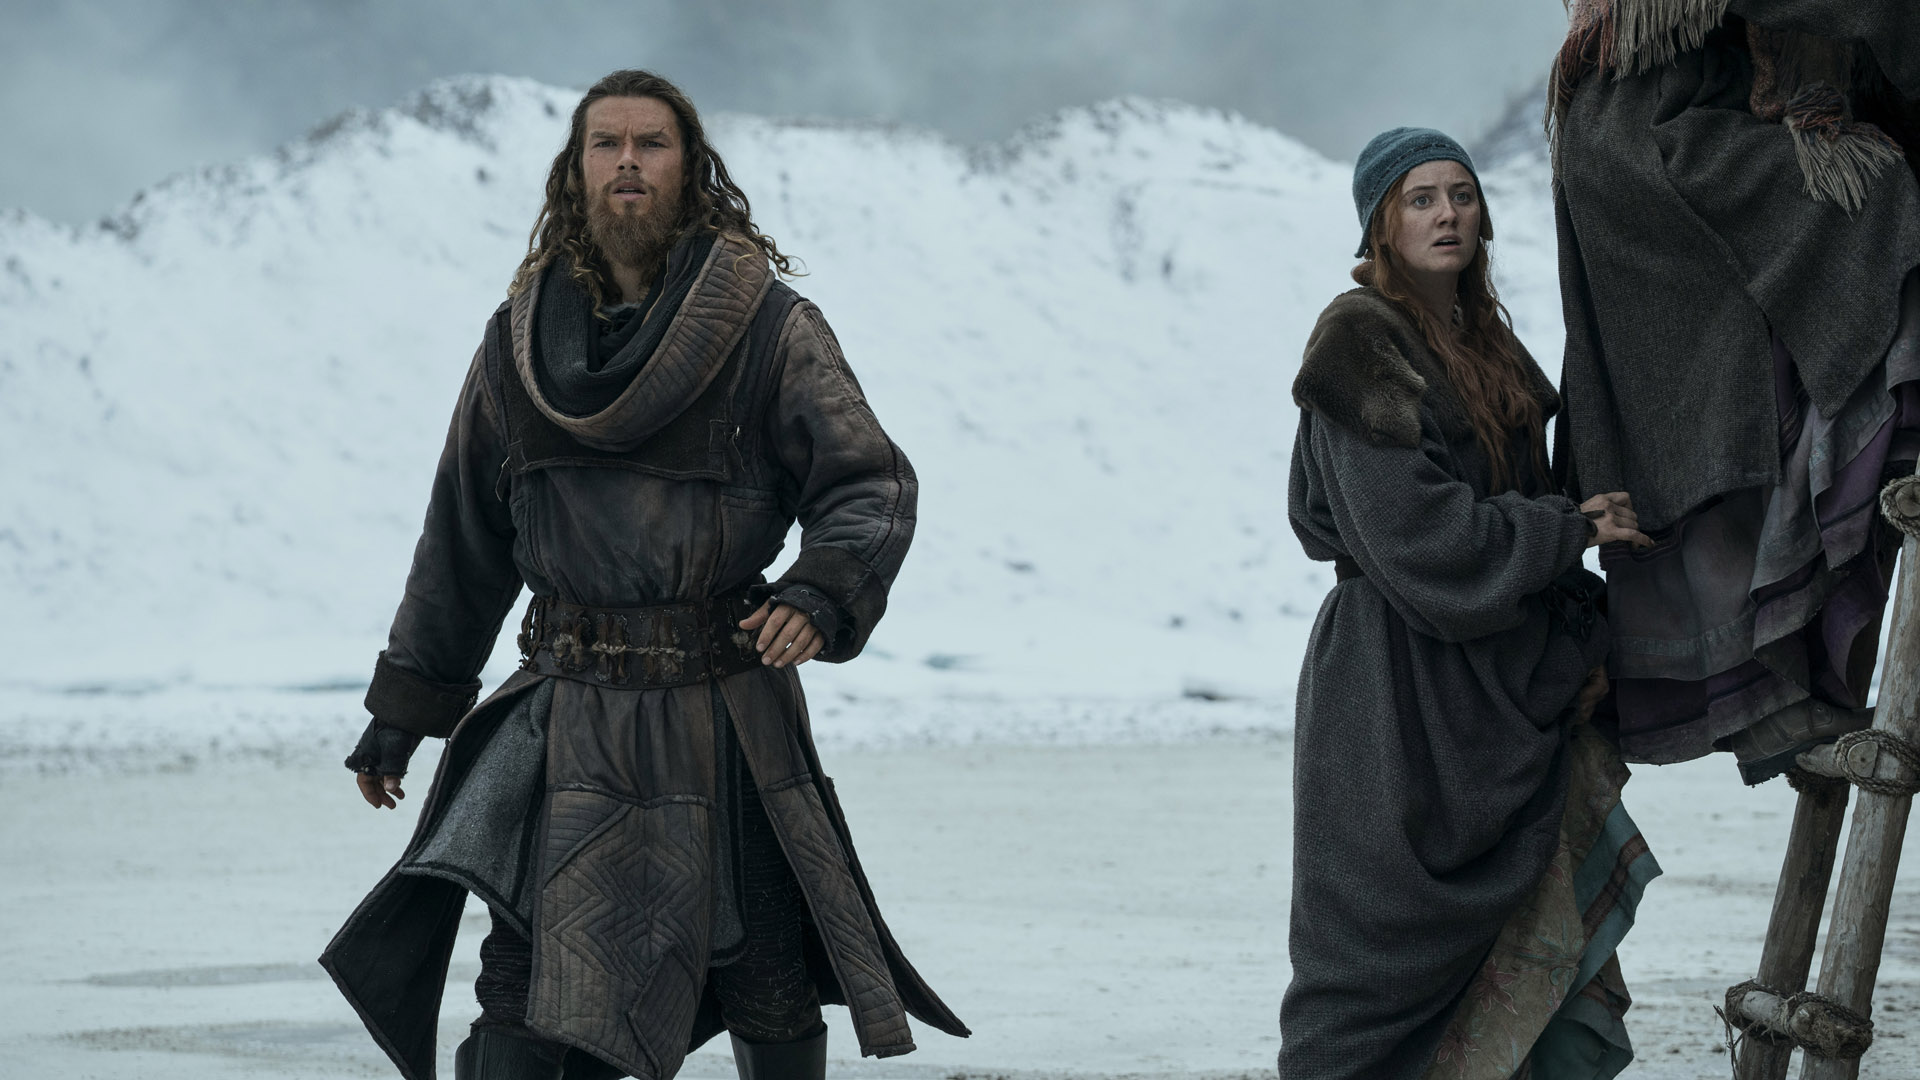 Leif looks concerned as he spots something off-camera in Vikings Valhalla season 2